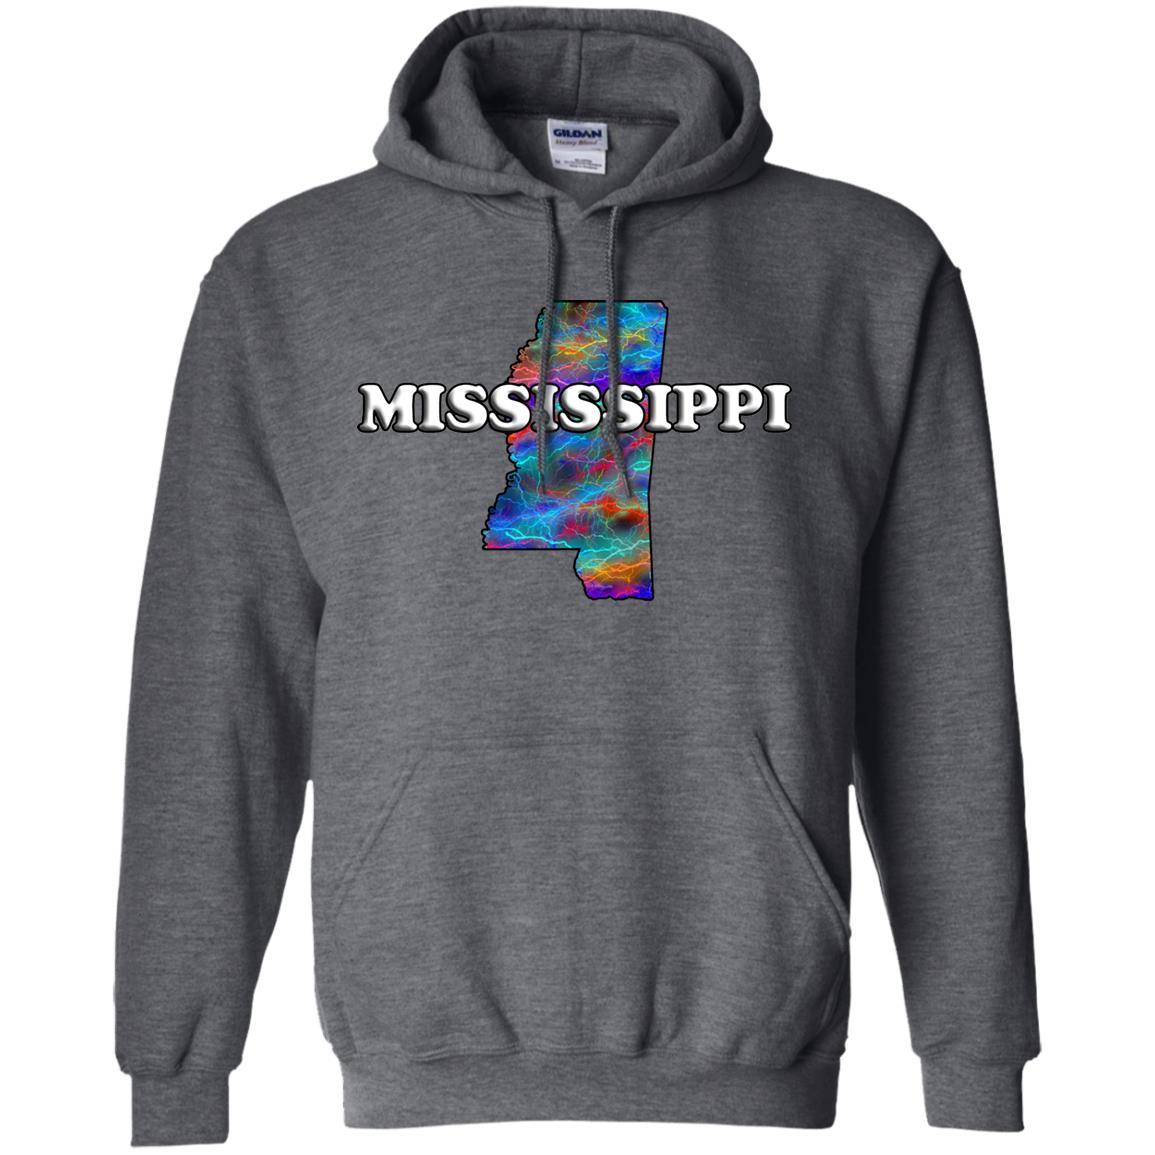 MISSISSIPPI STATE HOODIE